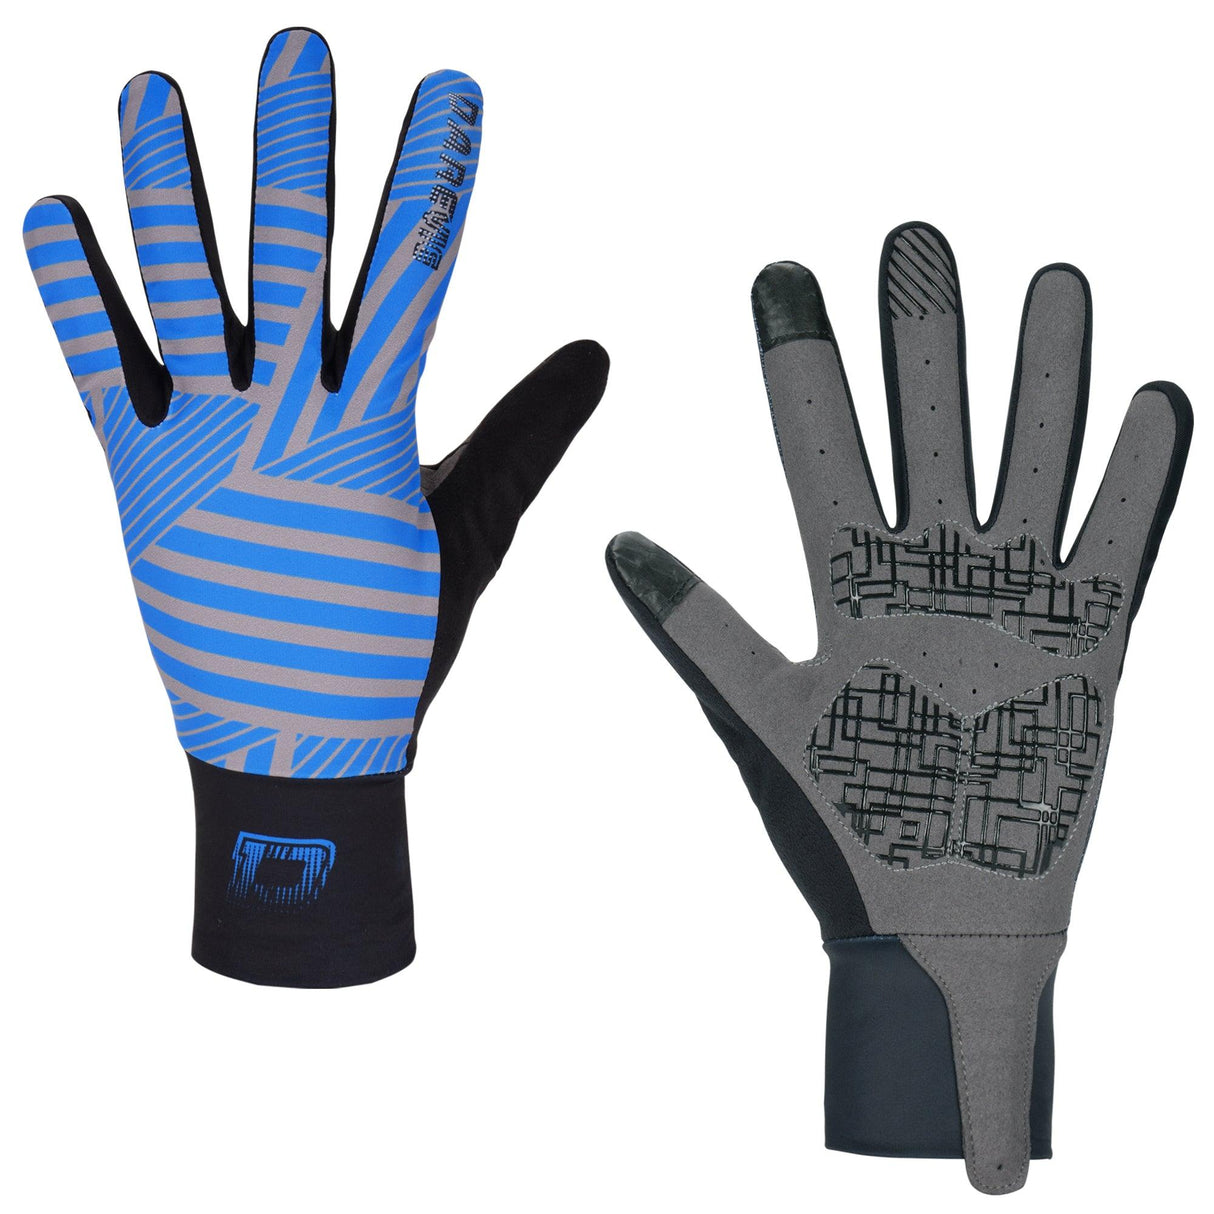 AEROPALM FULL FINGER CYCLING GLOVES - Darevie Shop